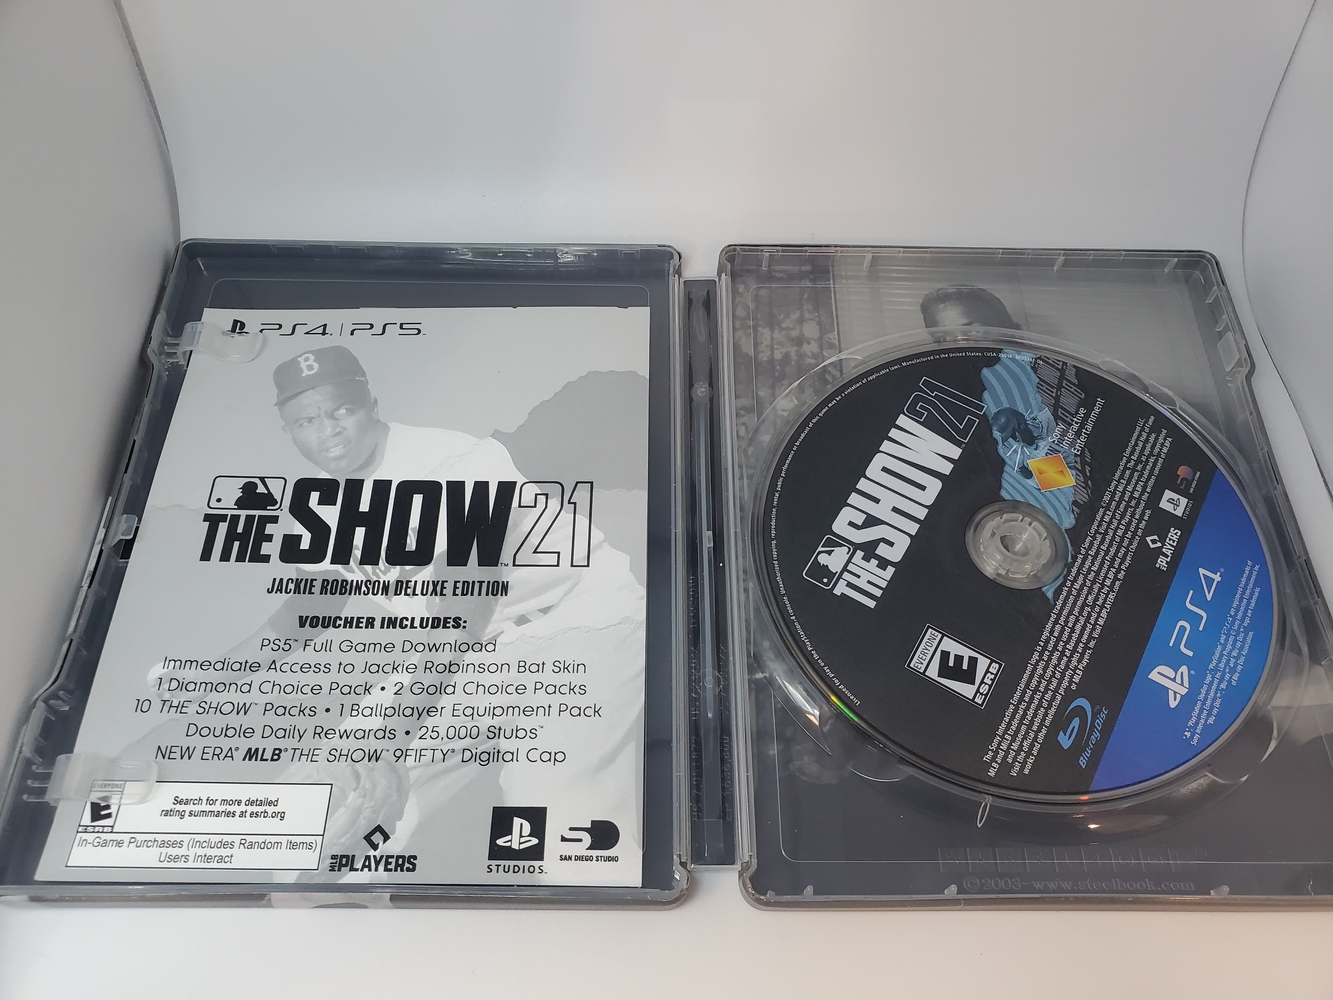 MLB The Show 22 Video Game for the Sony PlayStation 5